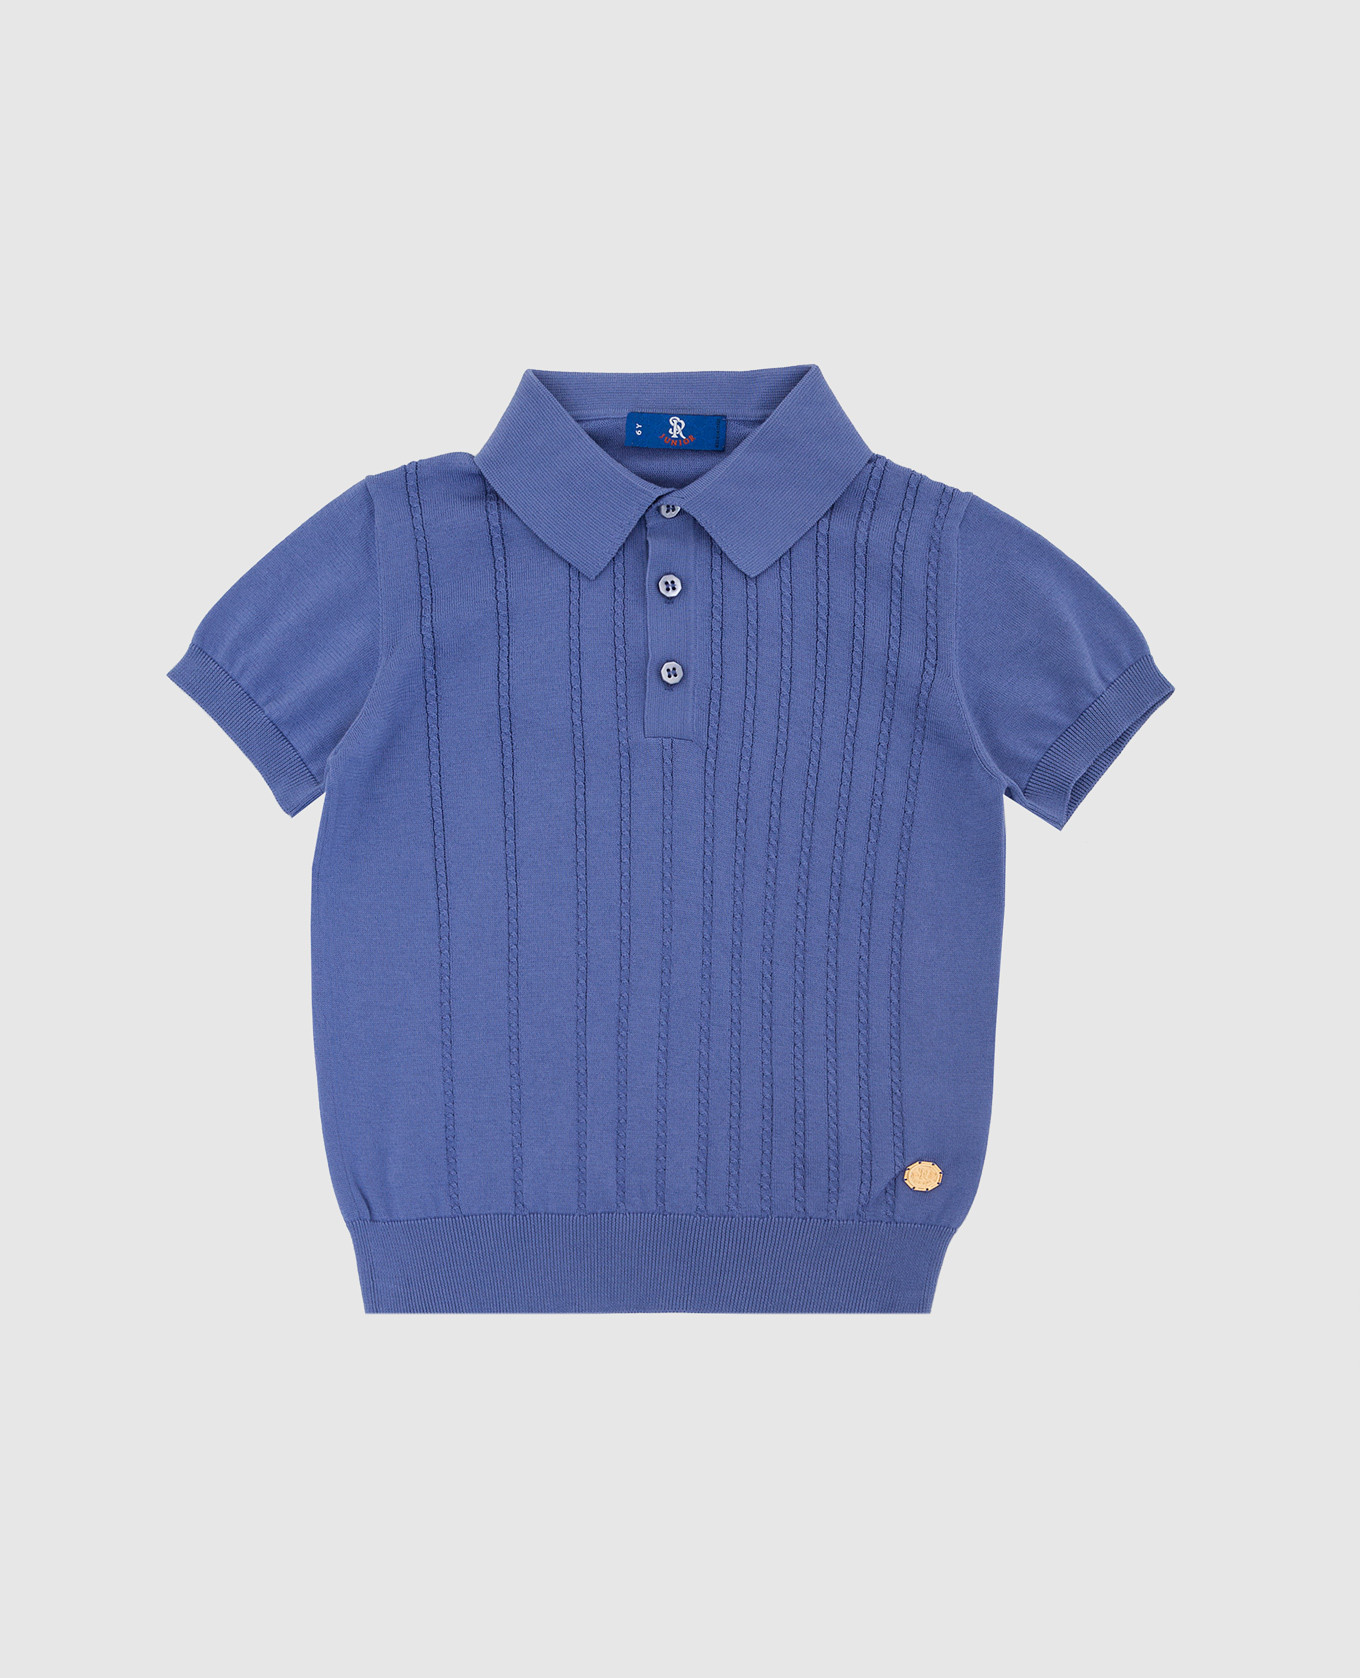 Children's light blue polo with a pattern